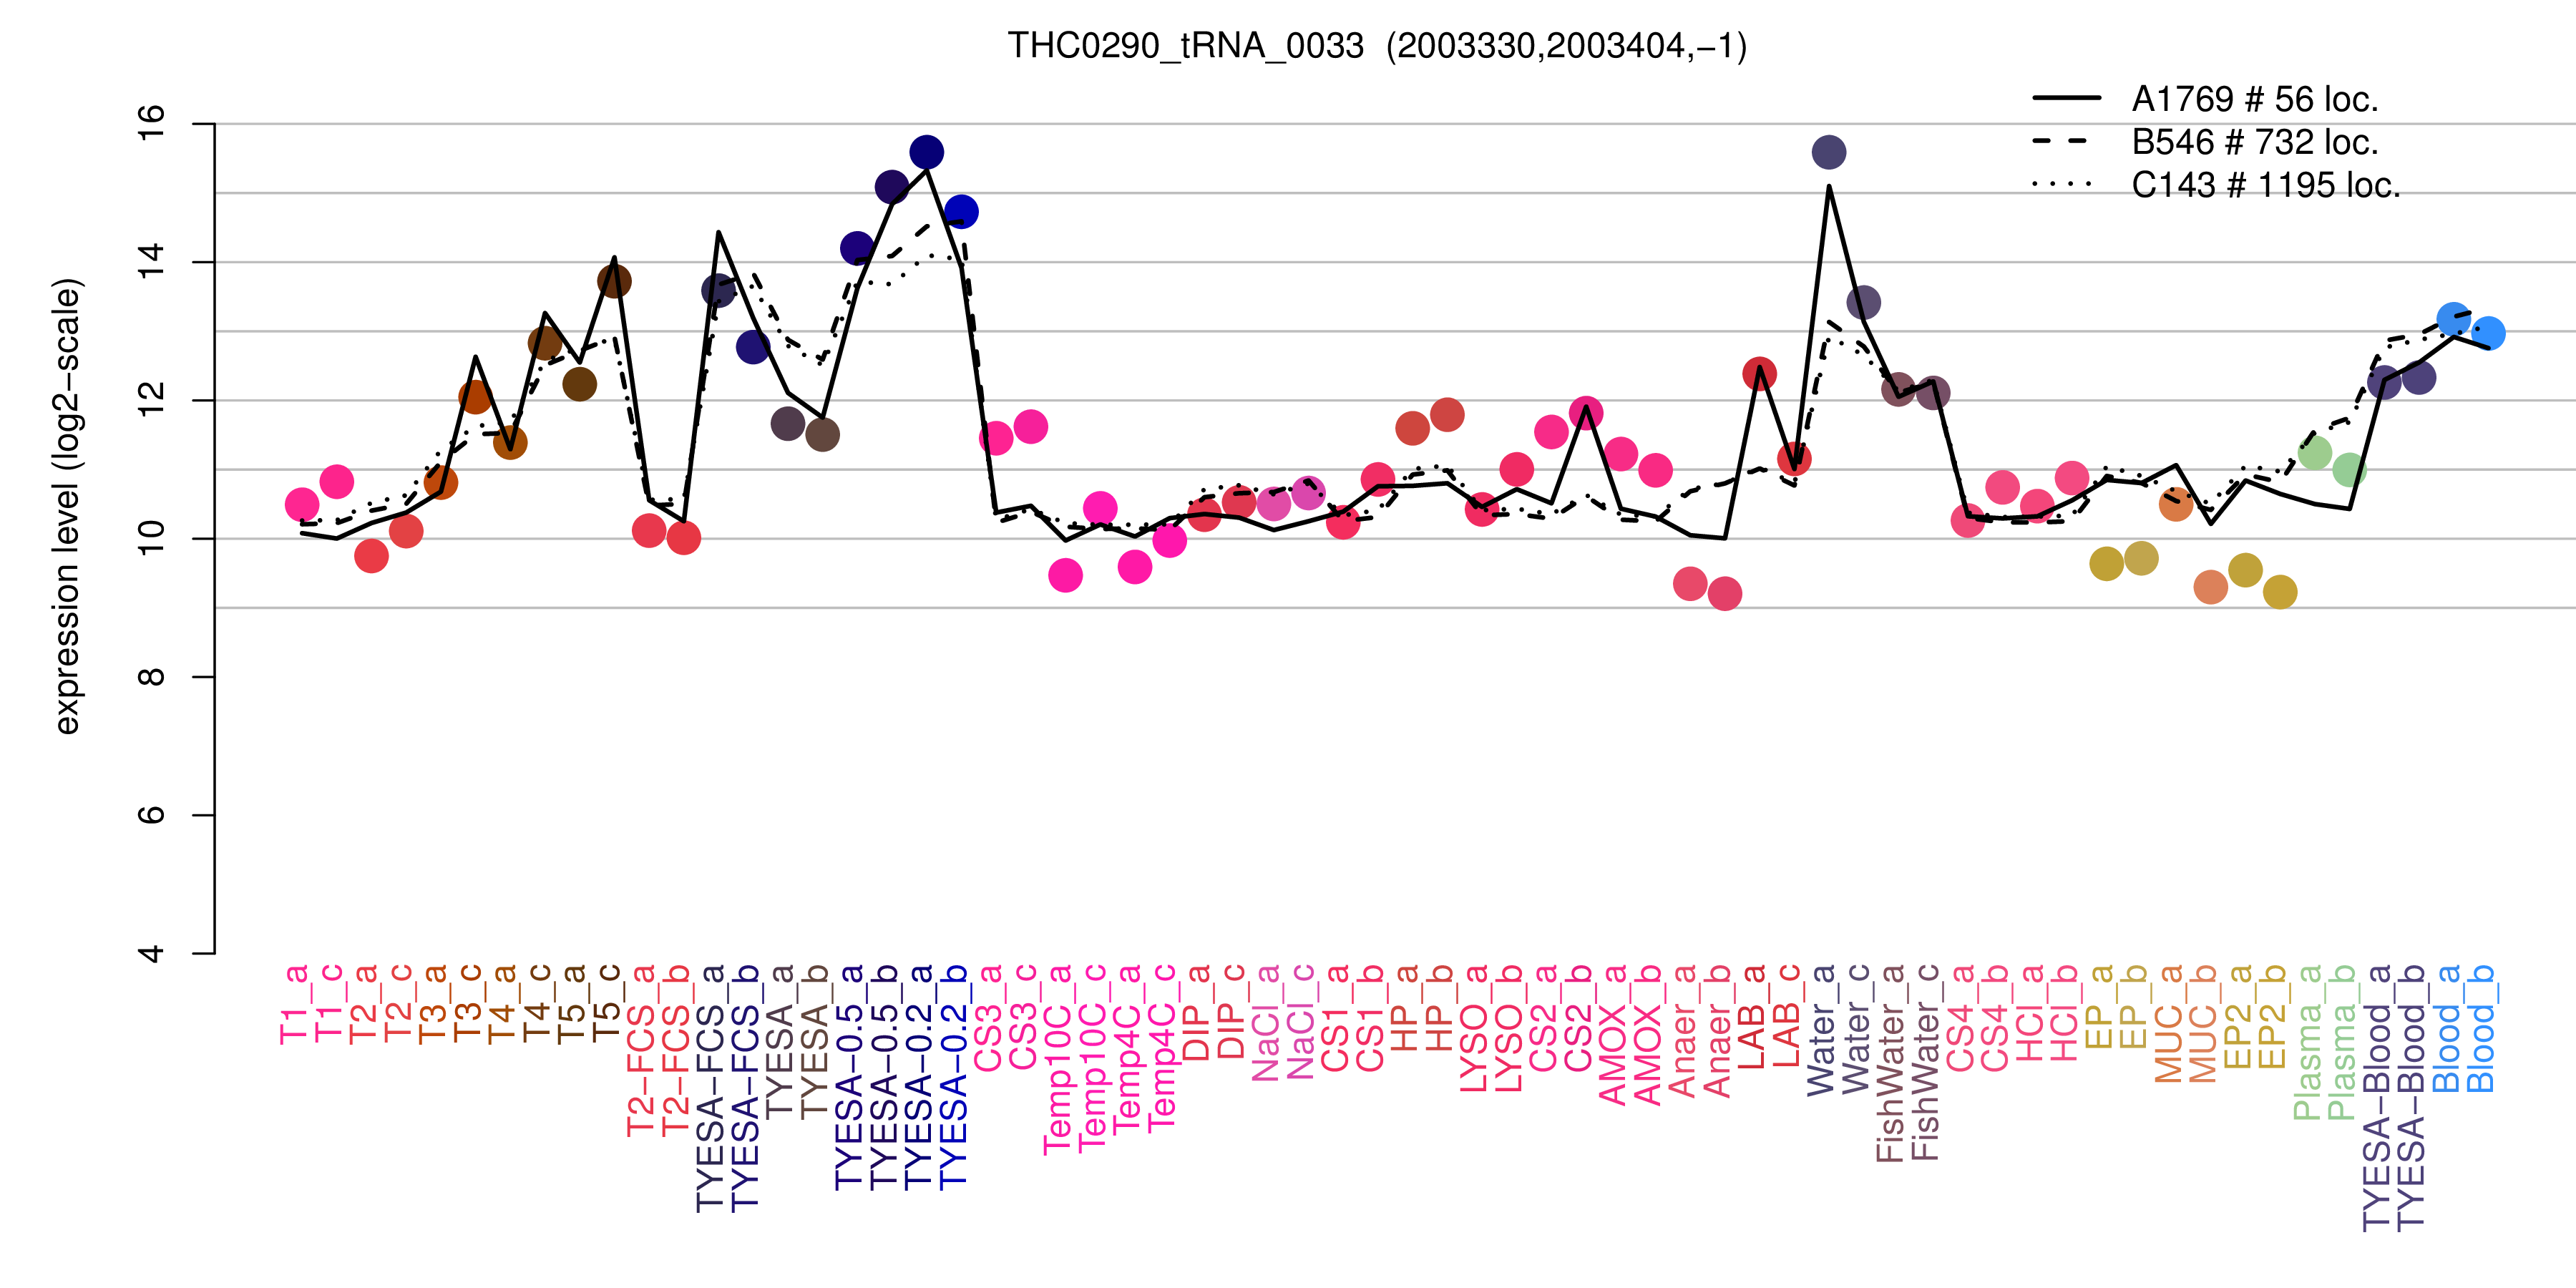 THC0290_tRNA_0033 expression levels among conditions